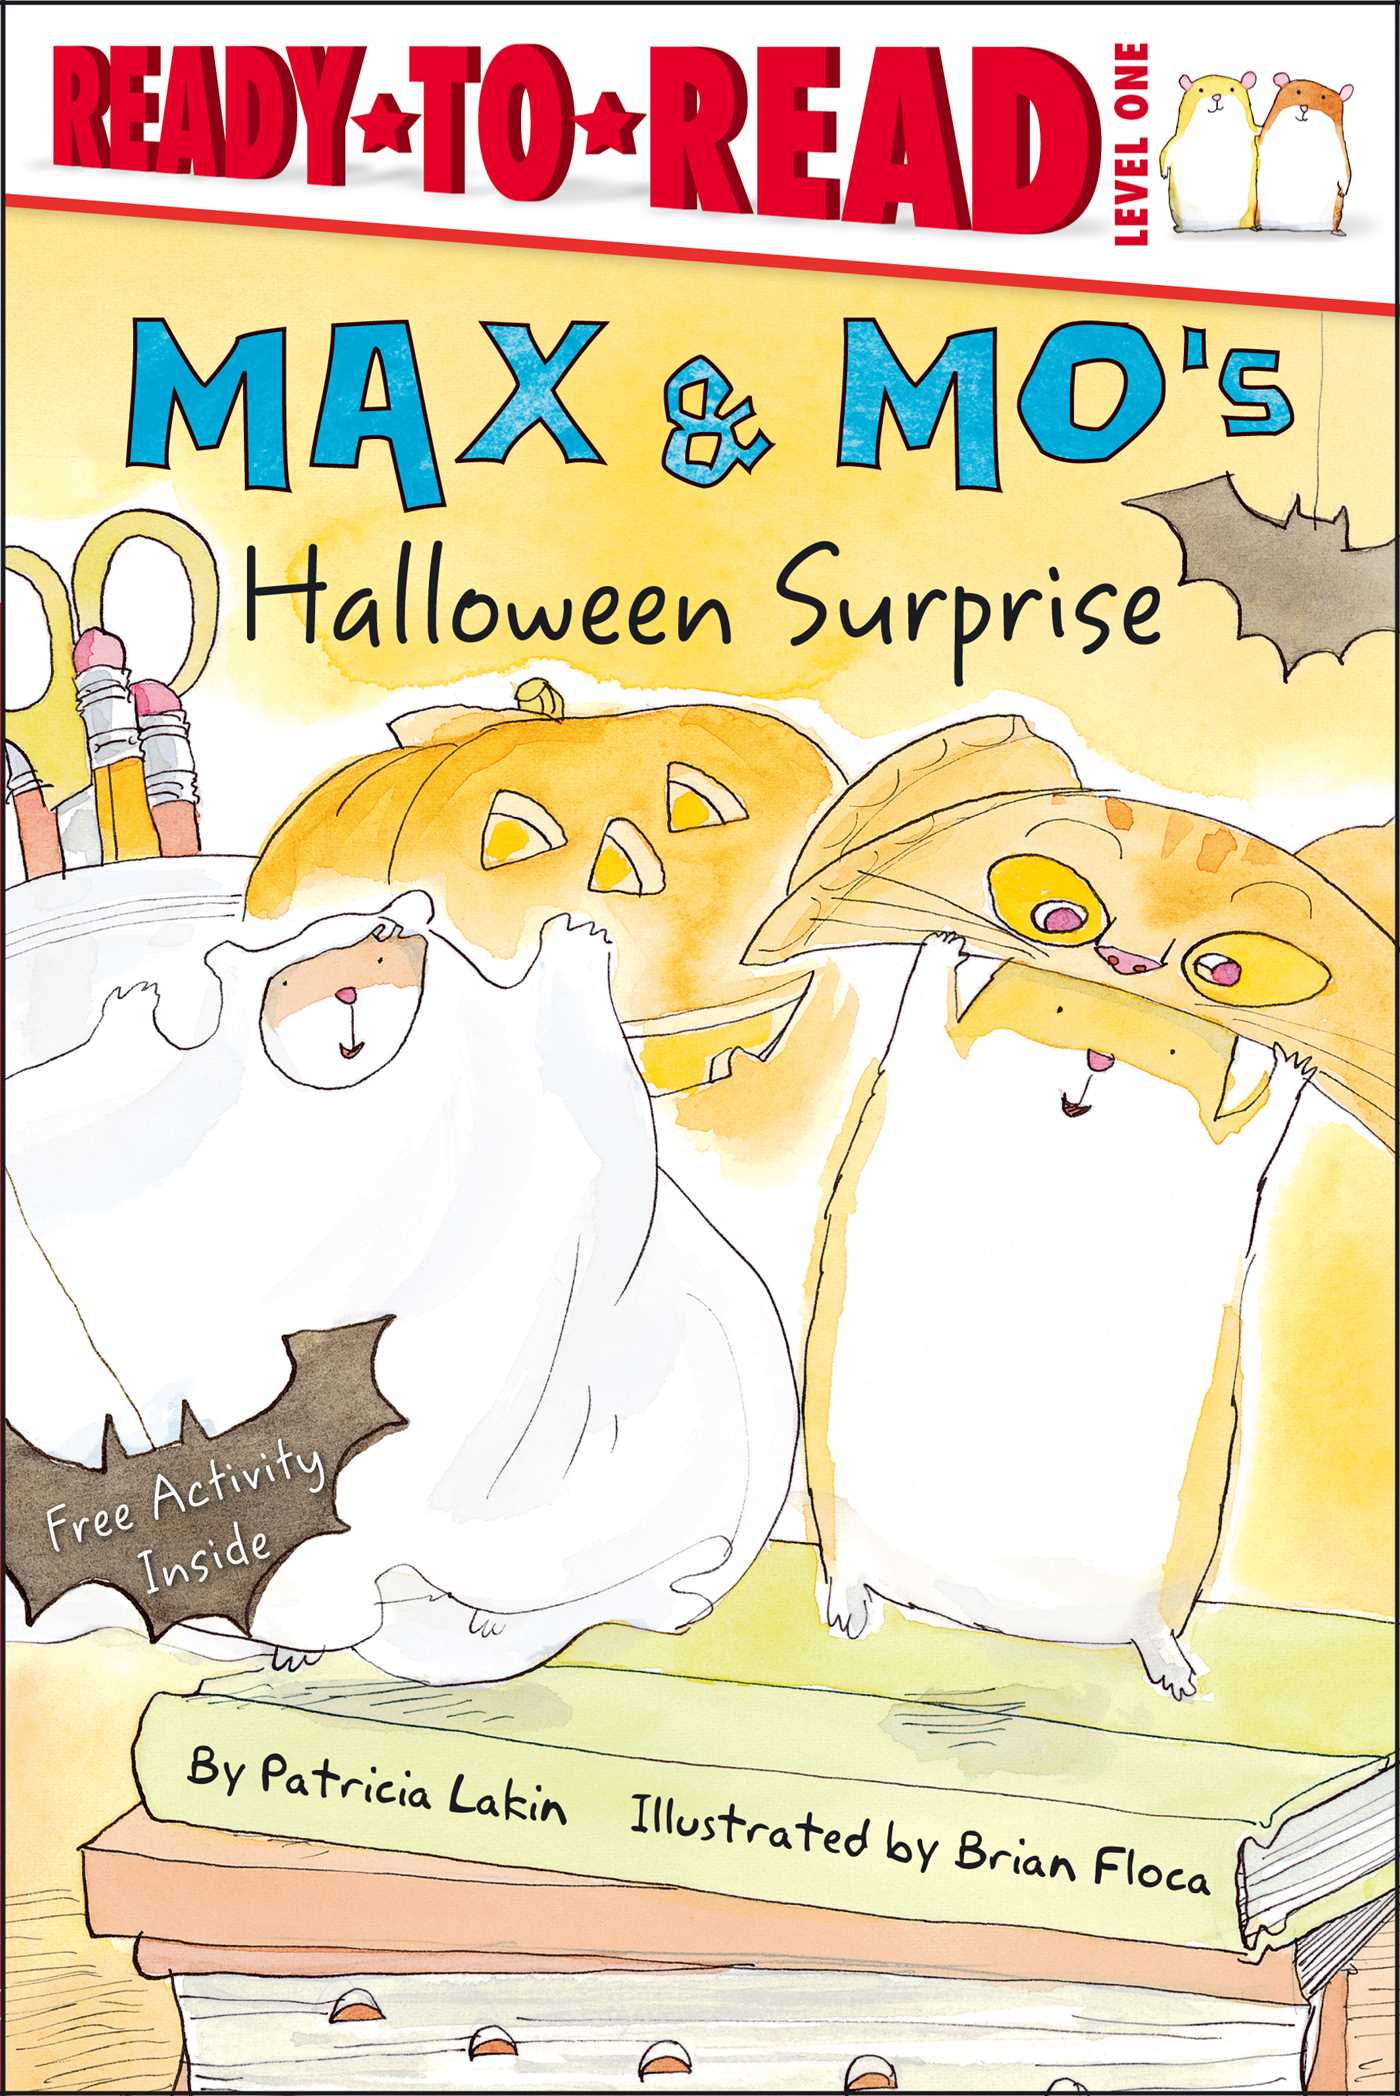 Ready-to-Read T.01 - Max & Mo's Halloween Surprise  | First reader